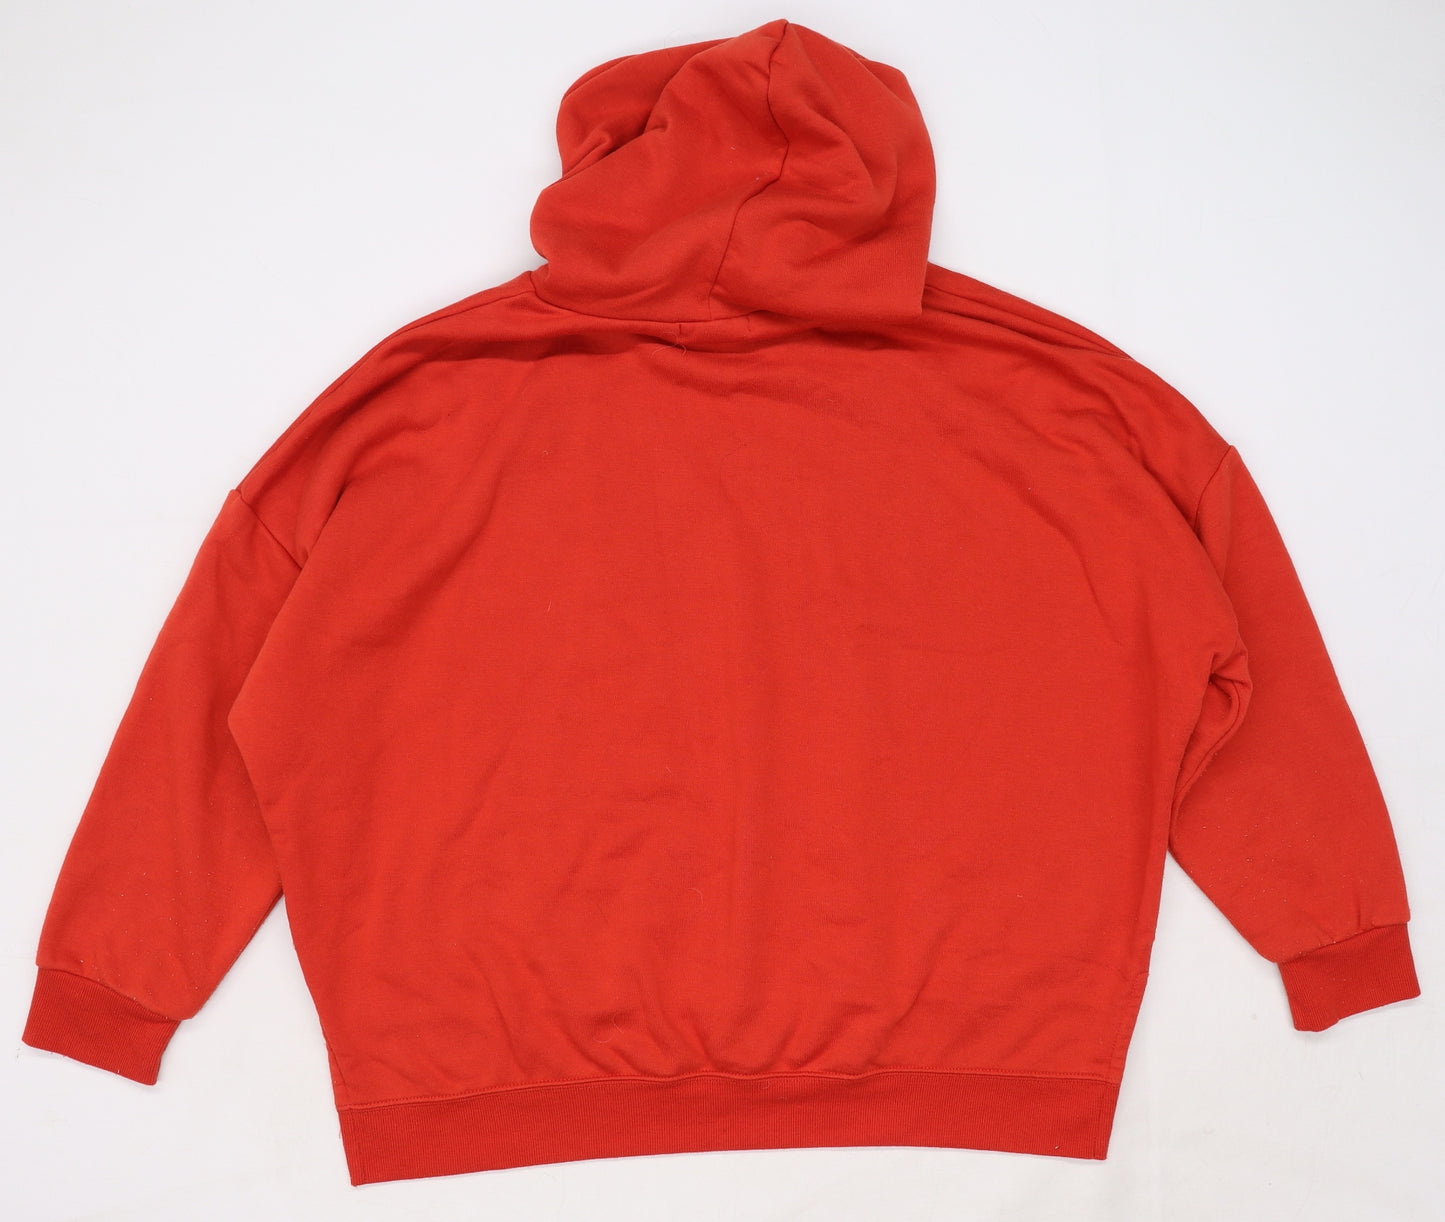 Primark Mens Red   Pullover Hoodie Size XL